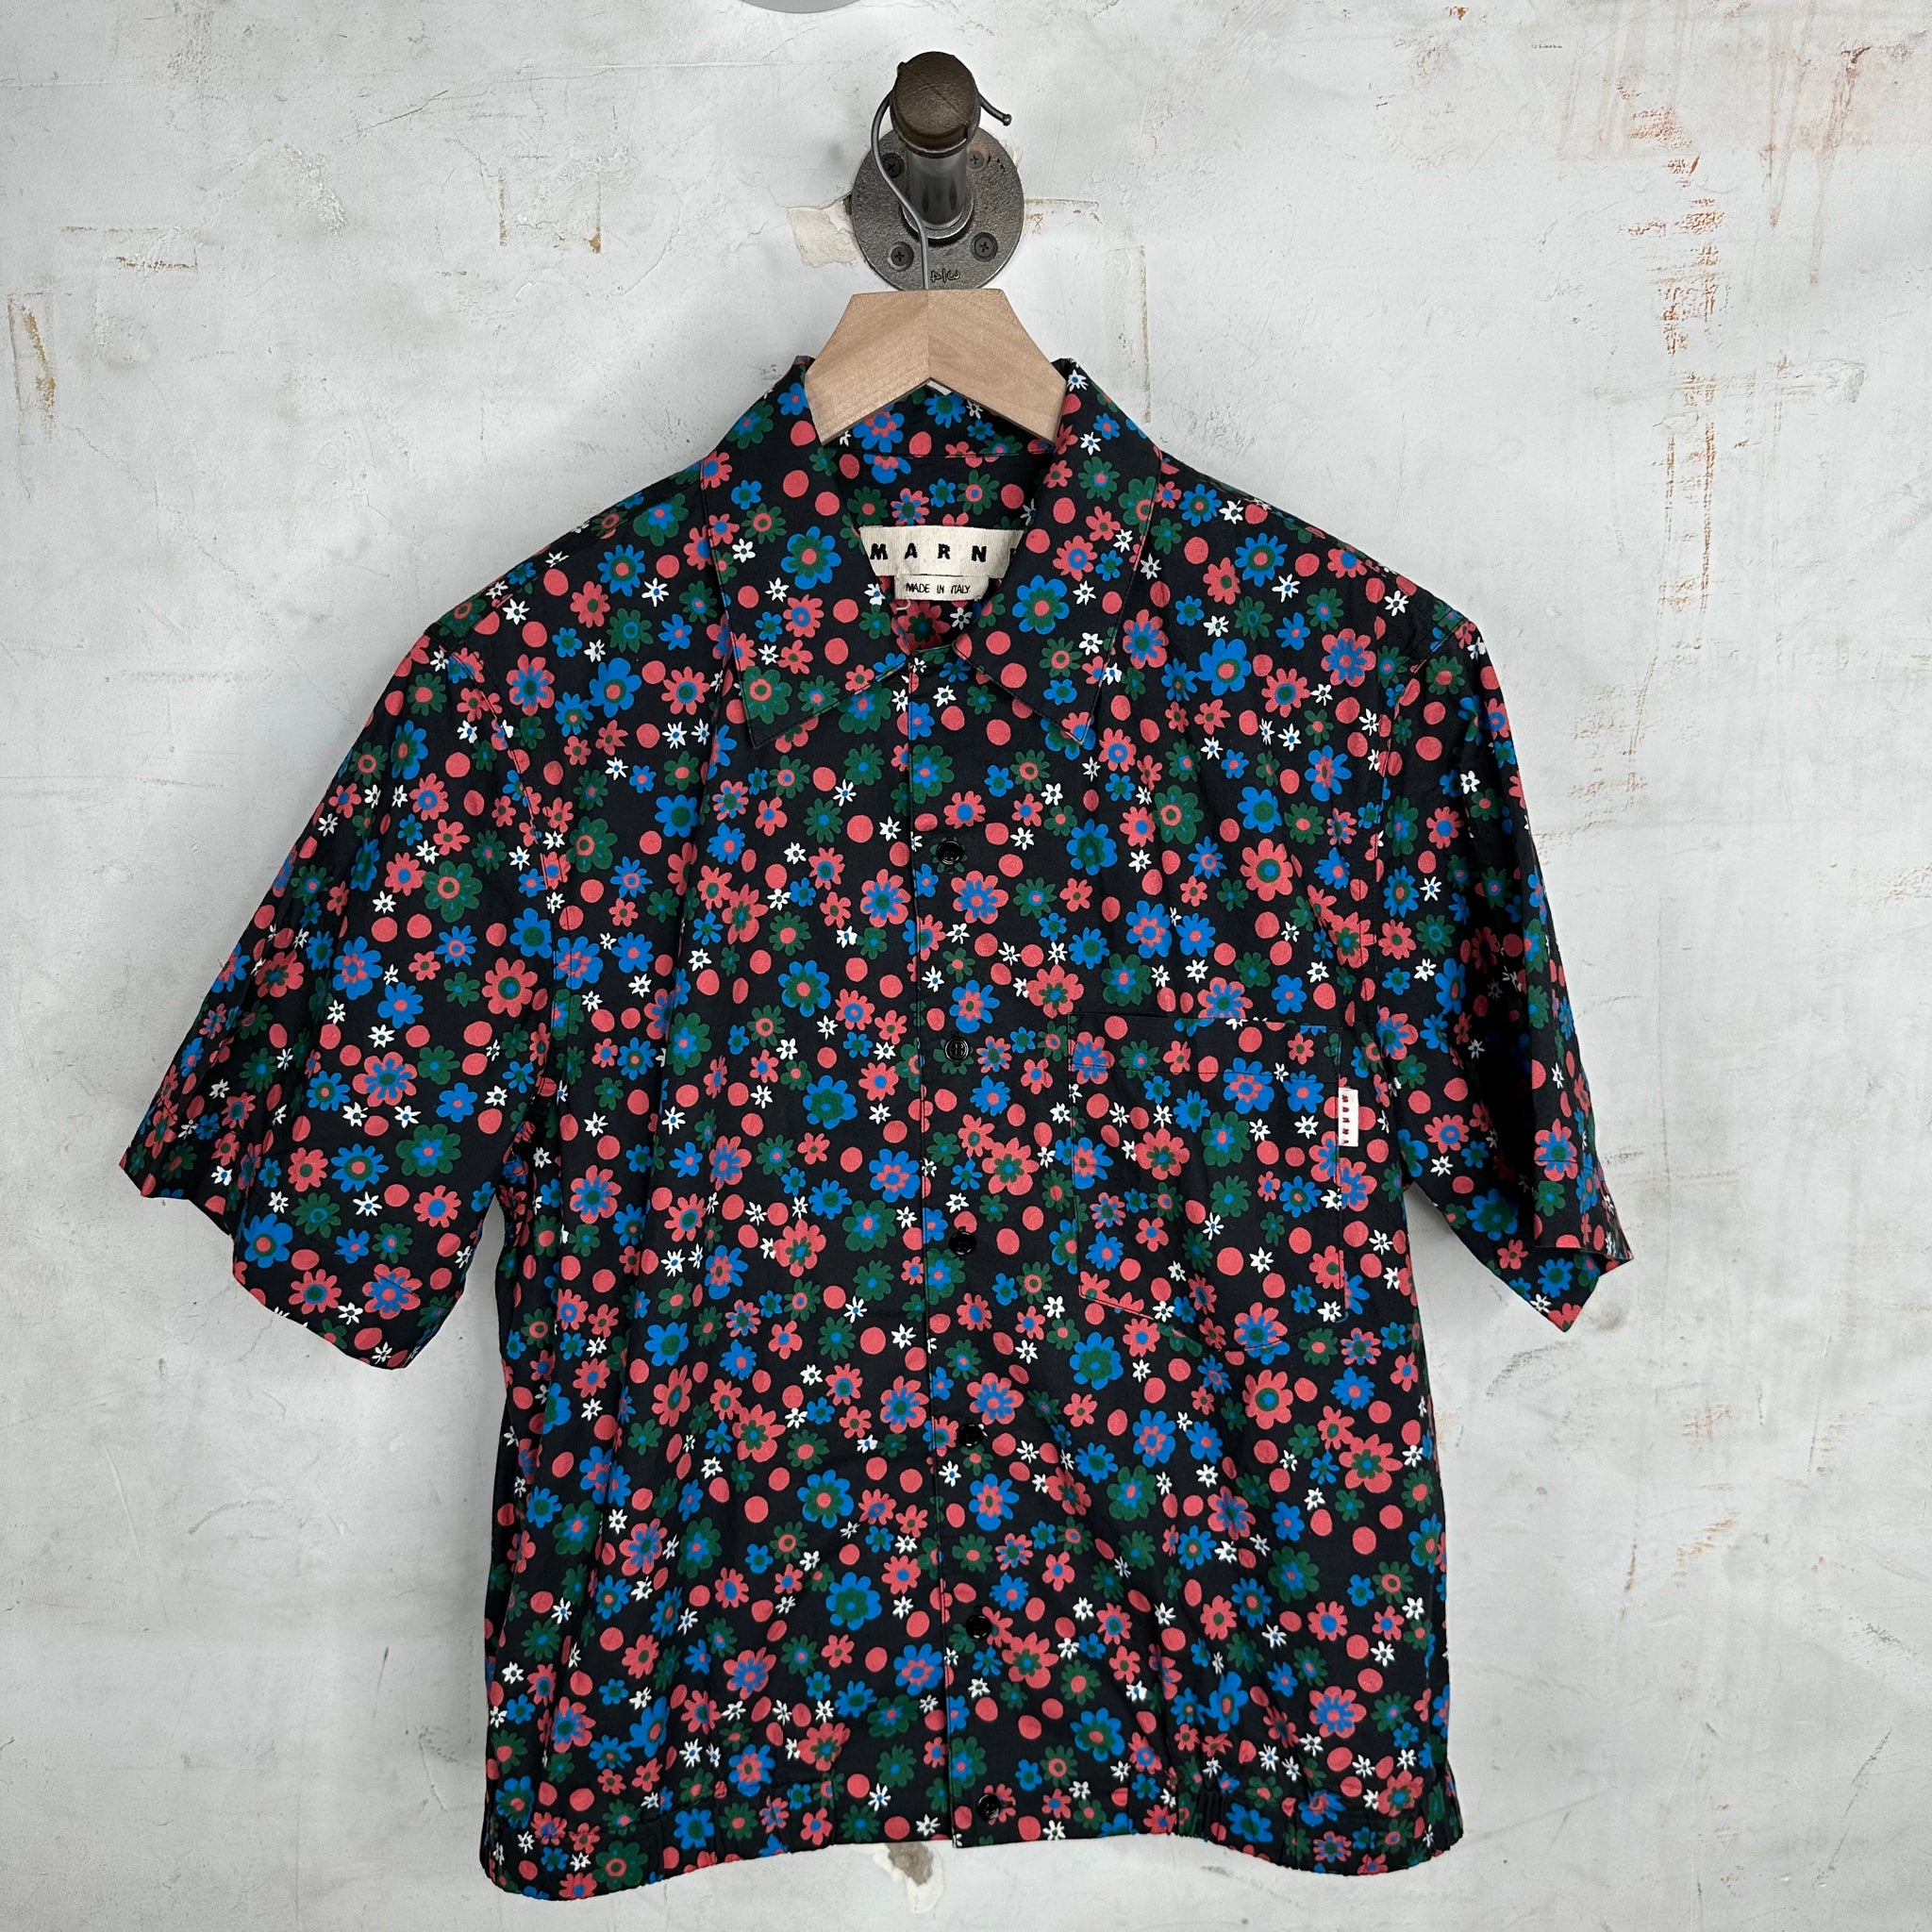 Marni Psychedelic Flowers Shirt